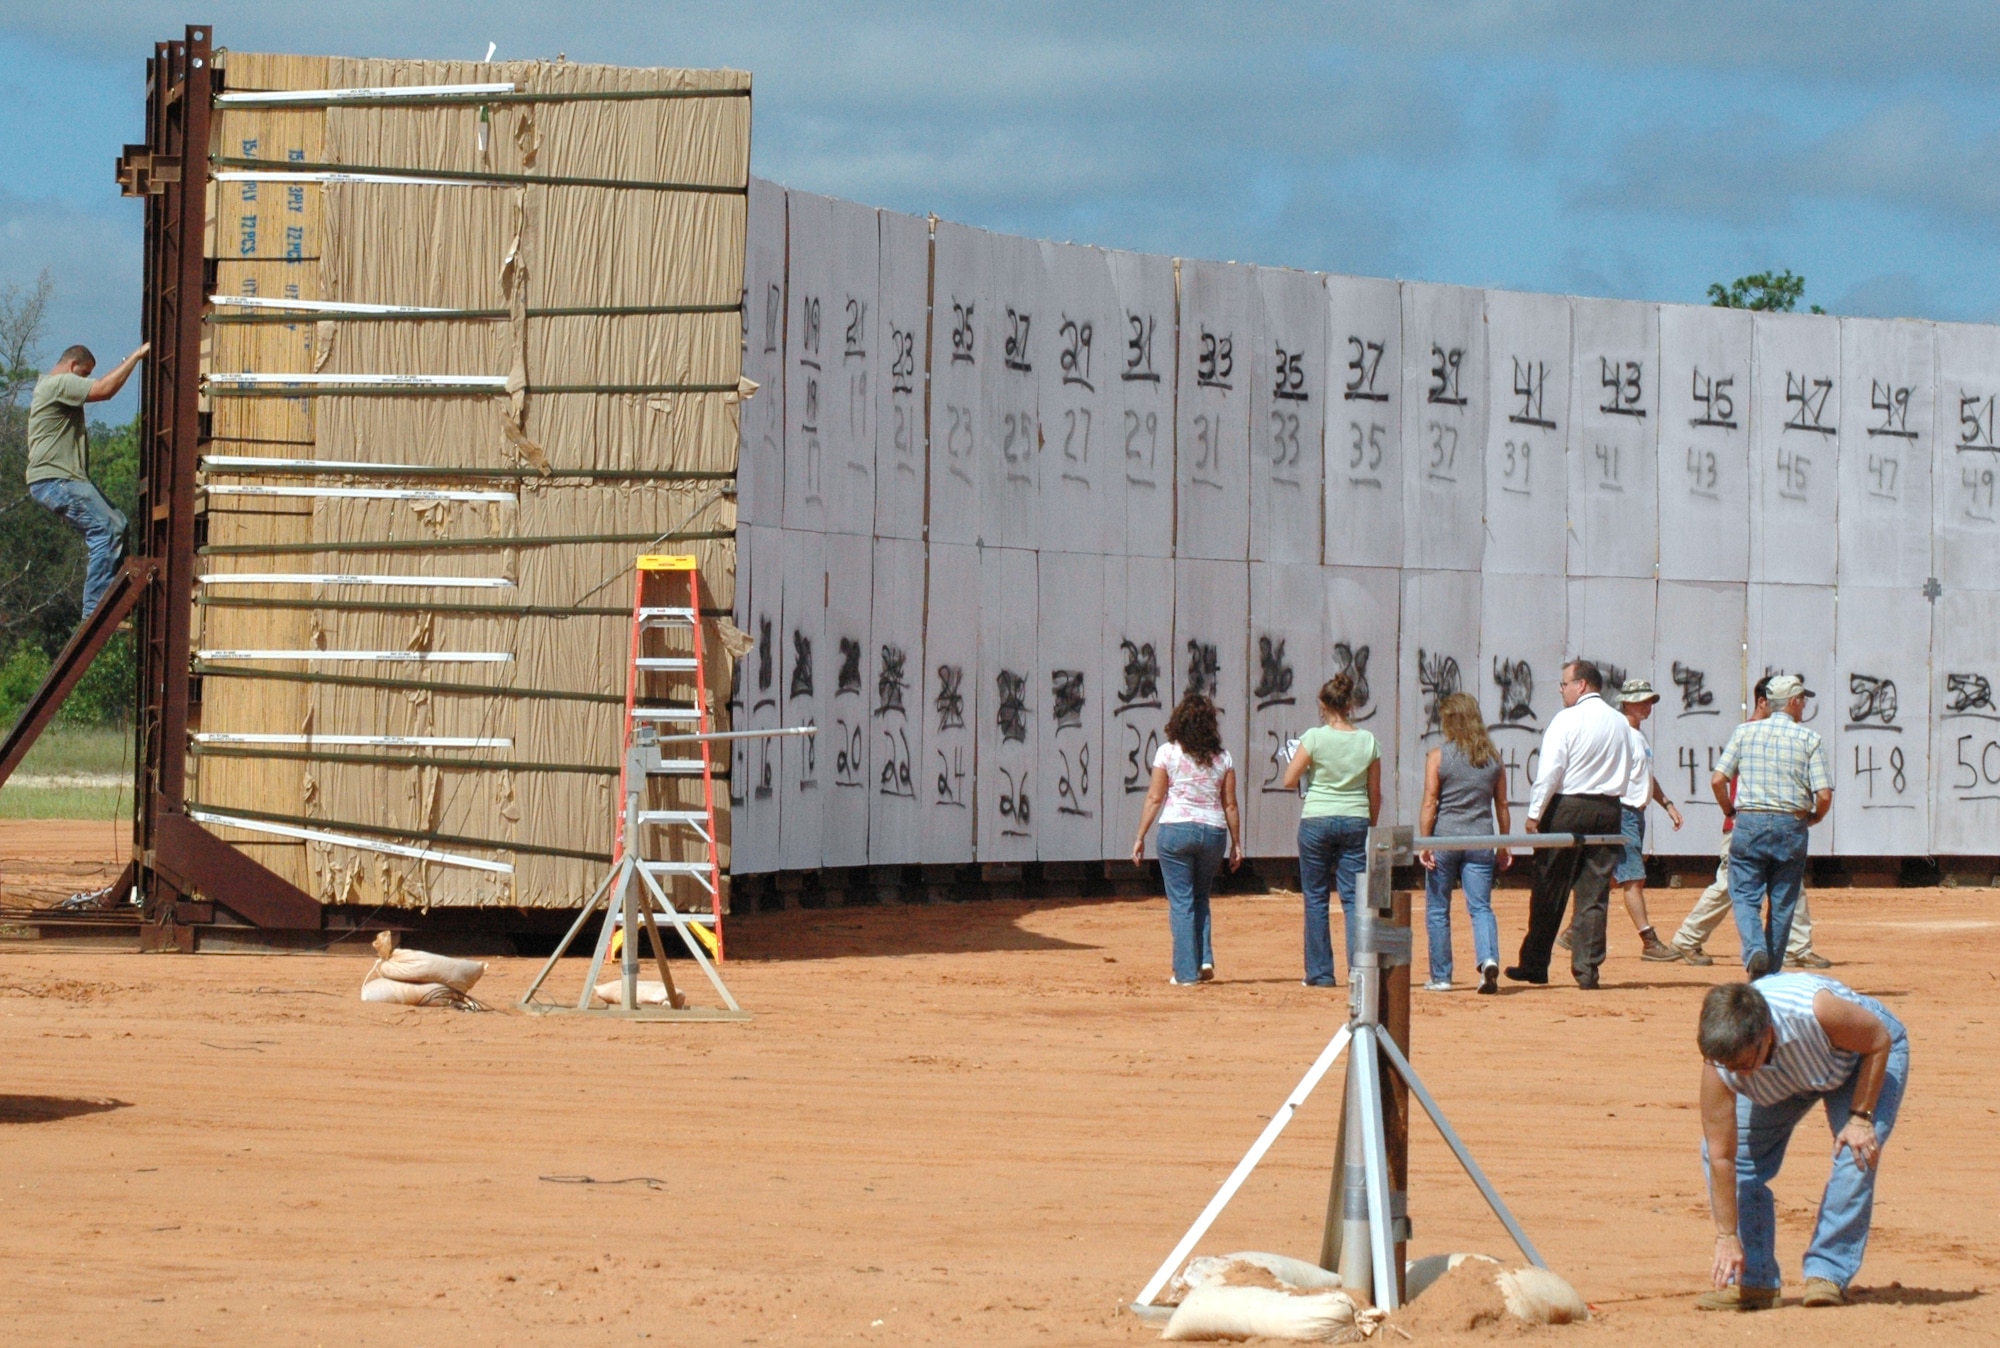 EGLIN AIR FORCE BASE, Fla. -- Contractors, customers, and others involved with the testing of a BLU-109X/B, conduct a pre-inspection of the arena where the munition will be detonated.